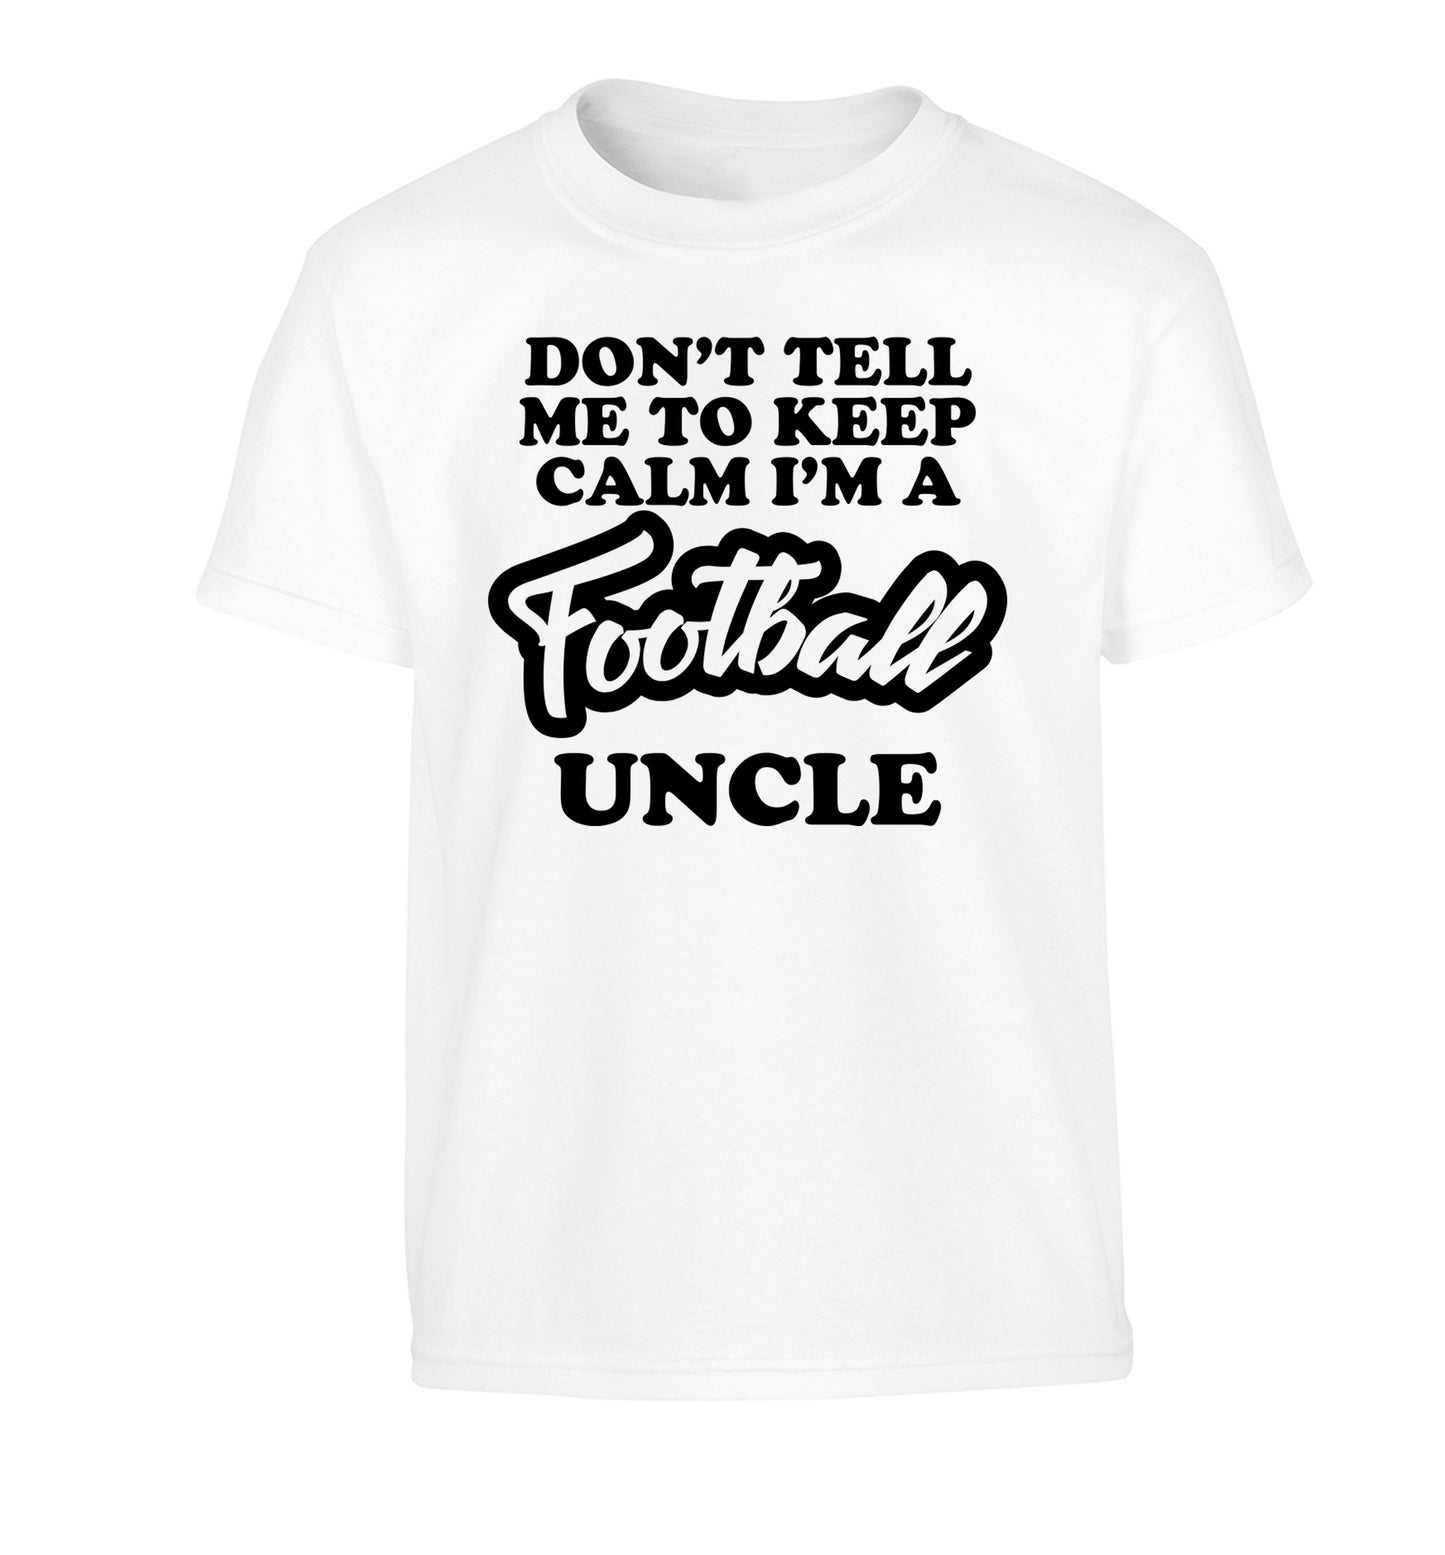 Don't tell me to keep calm I'm a football uncle Children's white Tshirt 12-14 Years